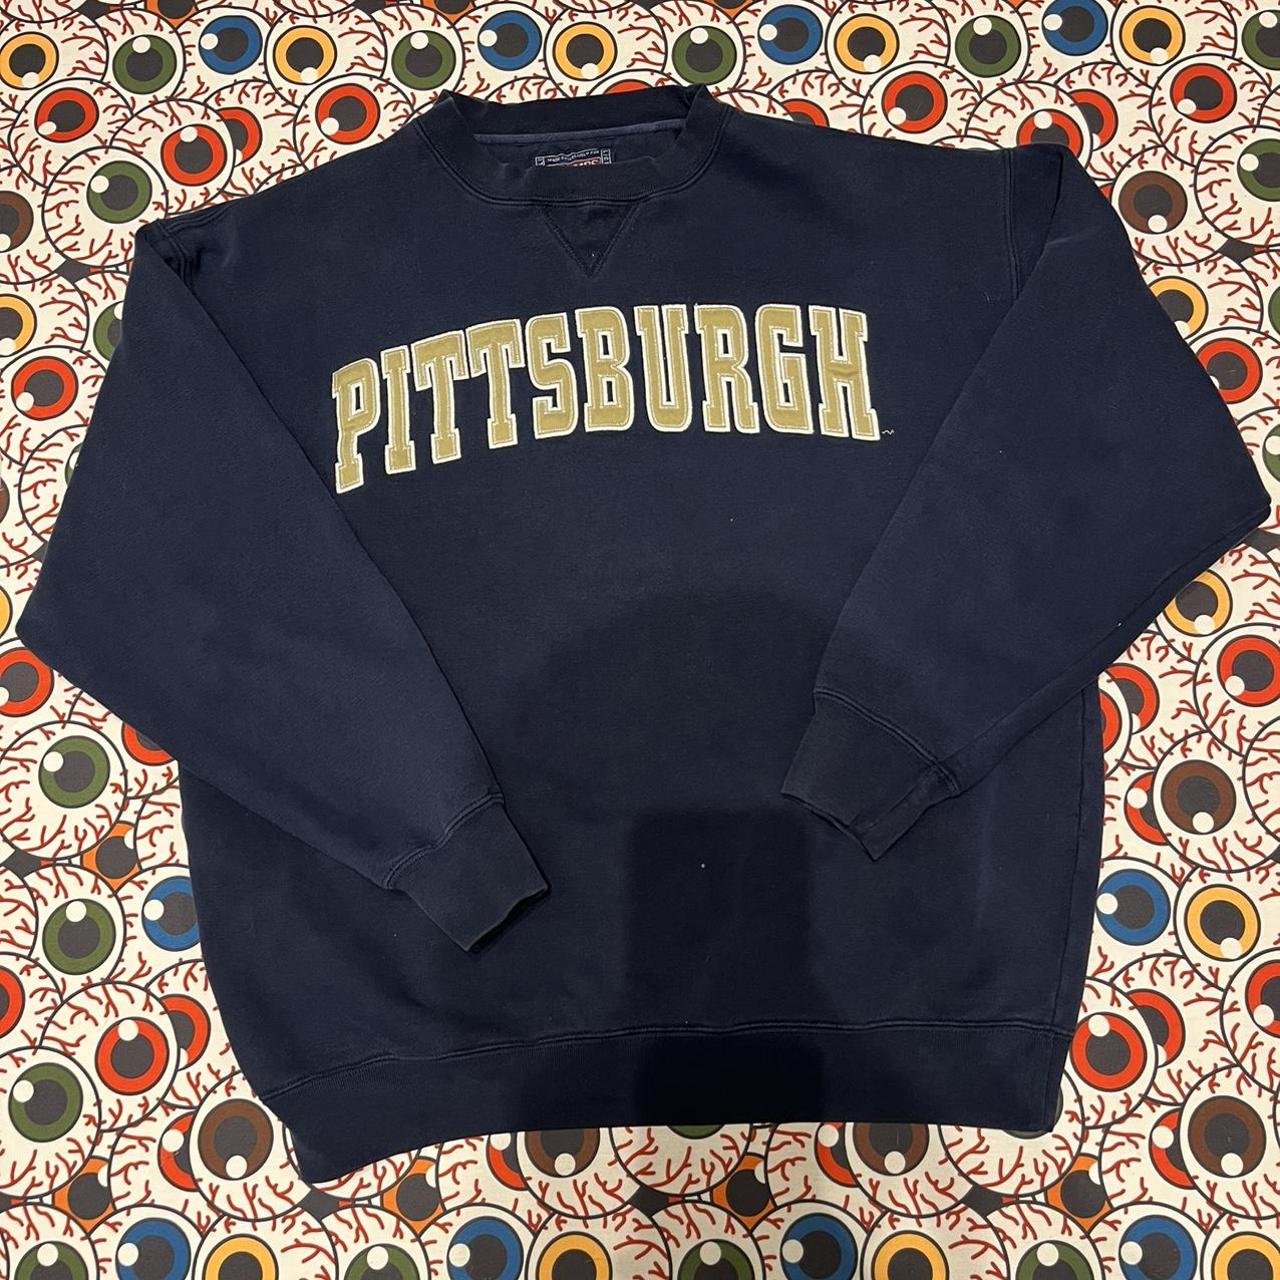 Champs Sports Men's Navy and Gold Jumper